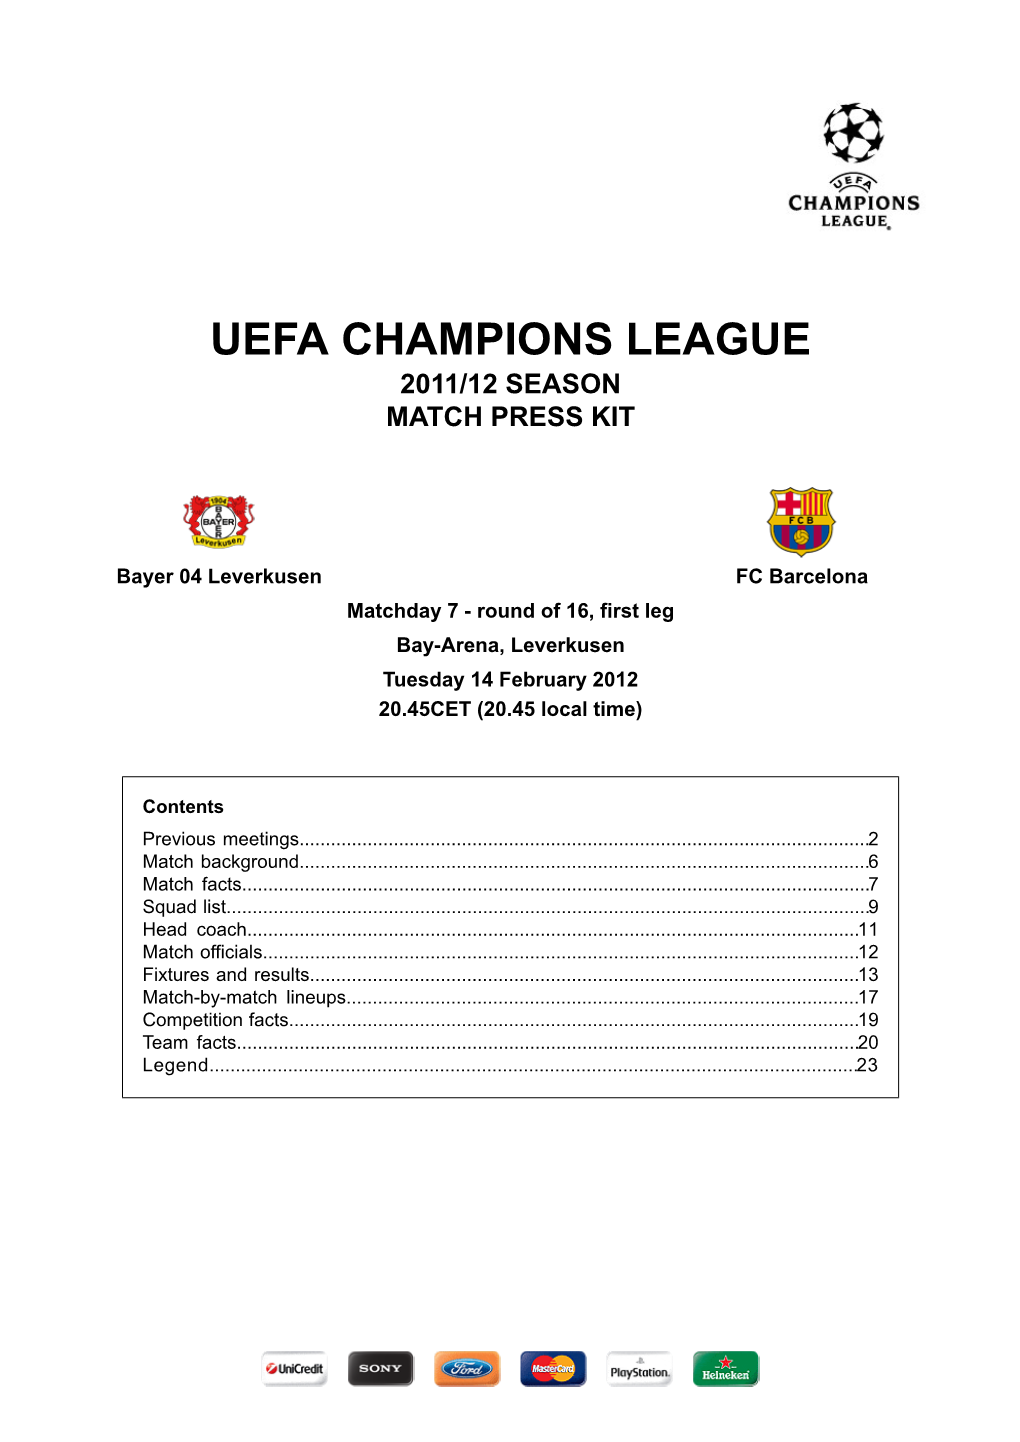 FC Barcelona Matchday 7 - Round of 16, First Leg Bay-Arena, Leverkusen Tuesday 14 February 2012 20.45CET (20.45 Local Time)